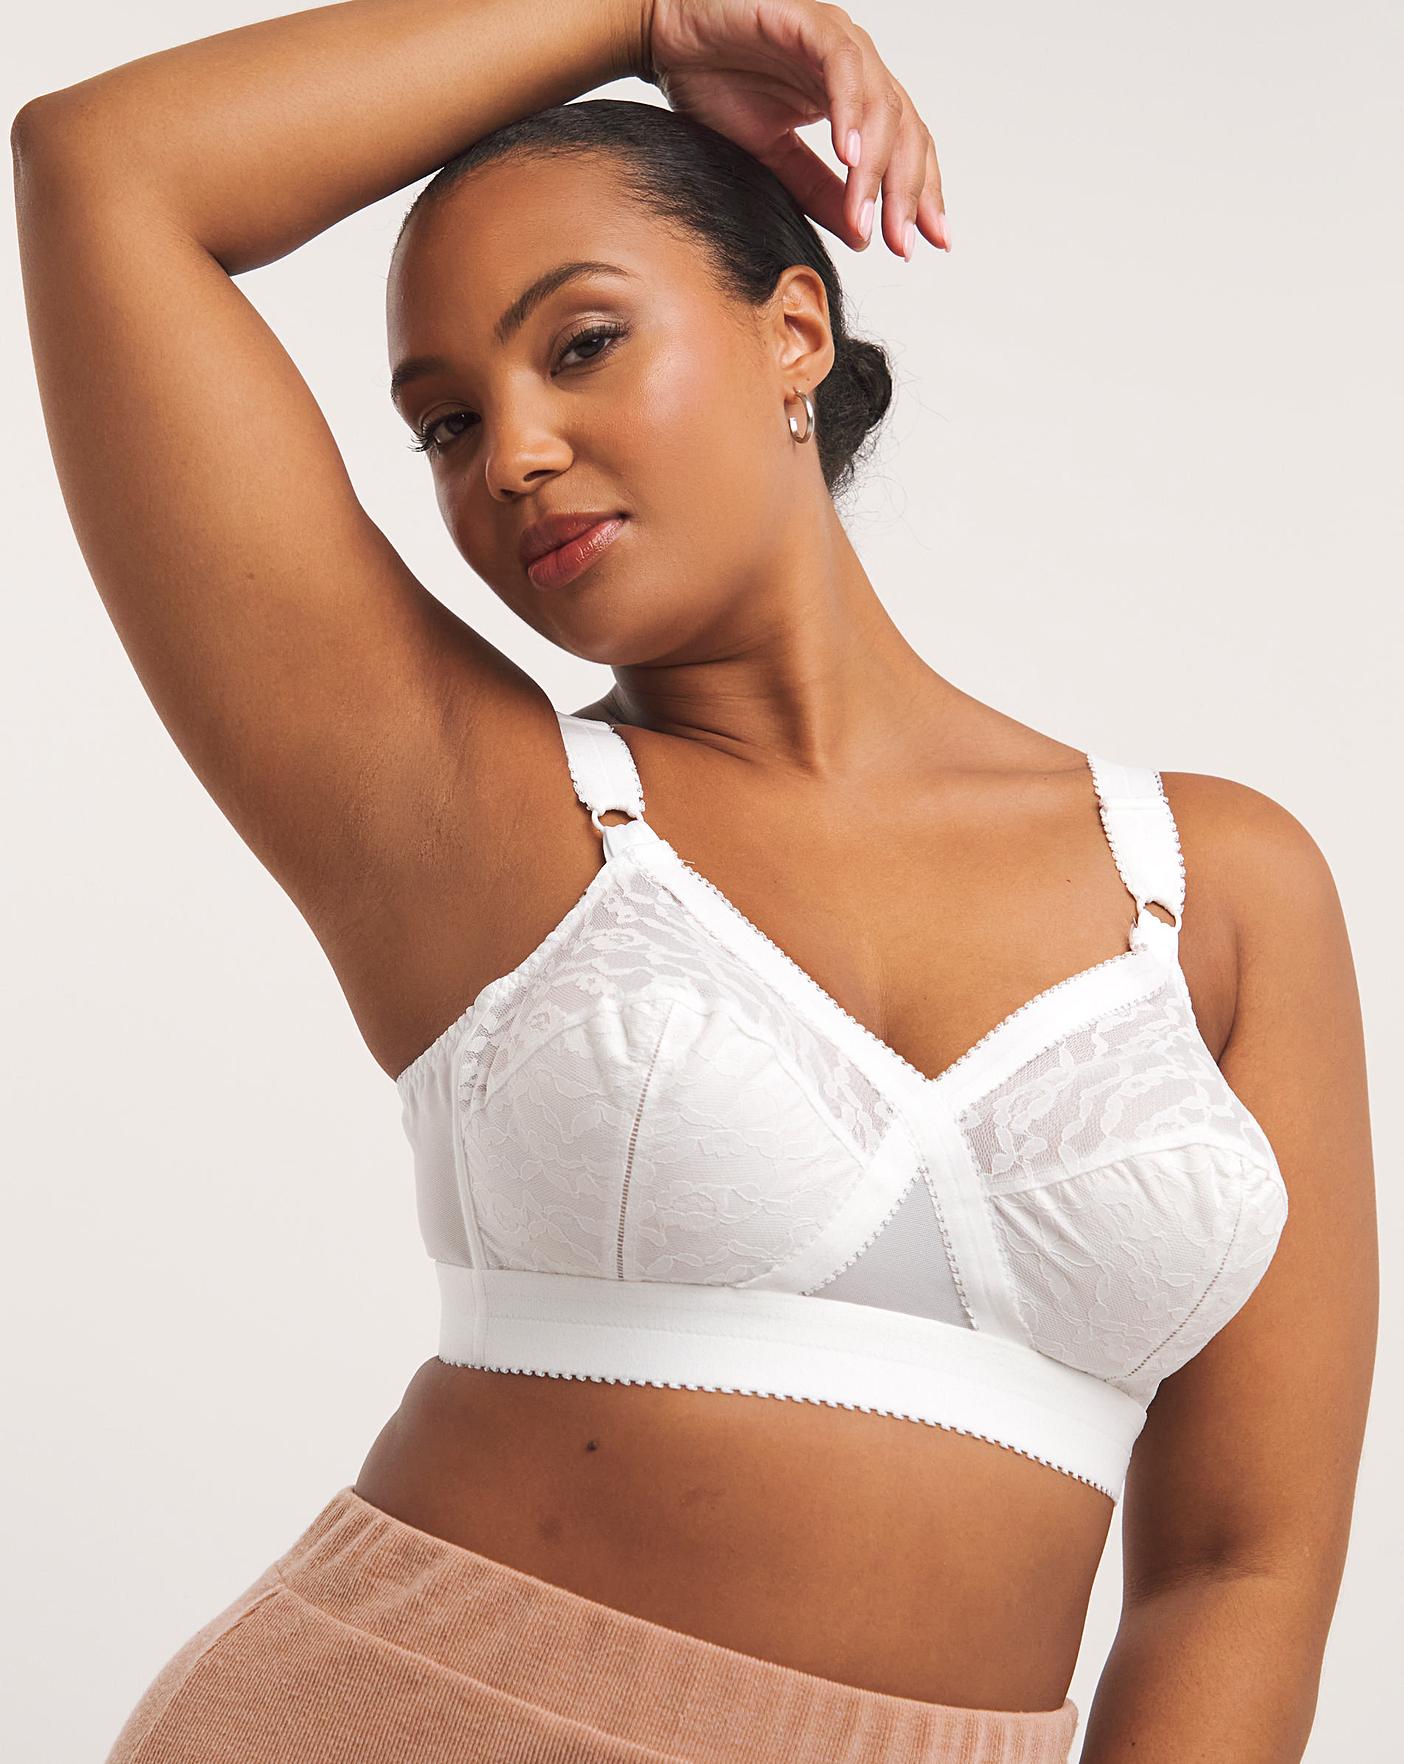 Playtex Women's Classic Cross Your Heart Bra with Lace Cups